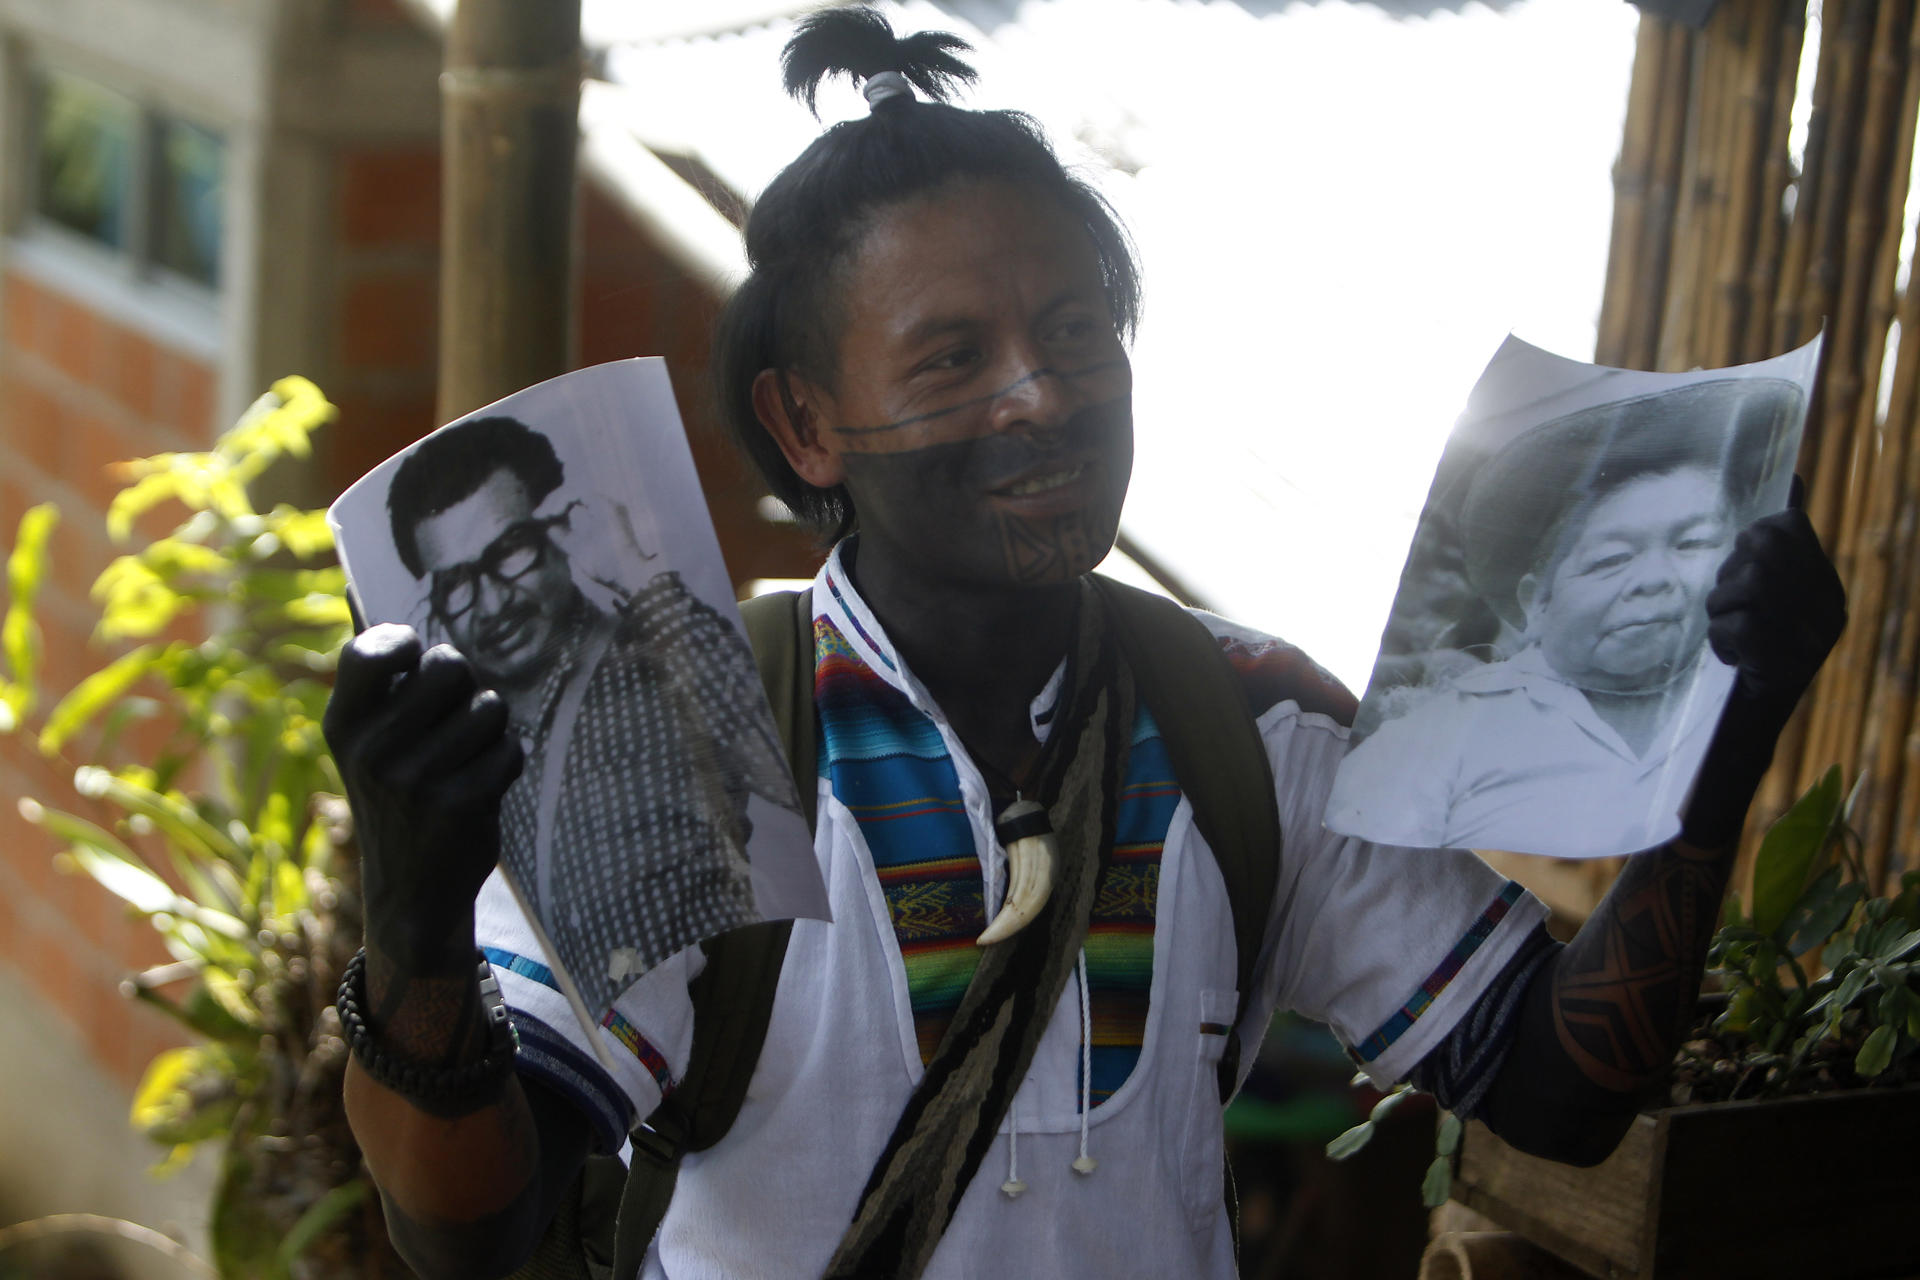 James Tascon, a member of the Embera Chami indigenous group, shows photos of community leaders to people visiting the Karmata Rua indigenous reserve in northwestern Colombia. EFE/ Luis Eduardo Noriega A.
